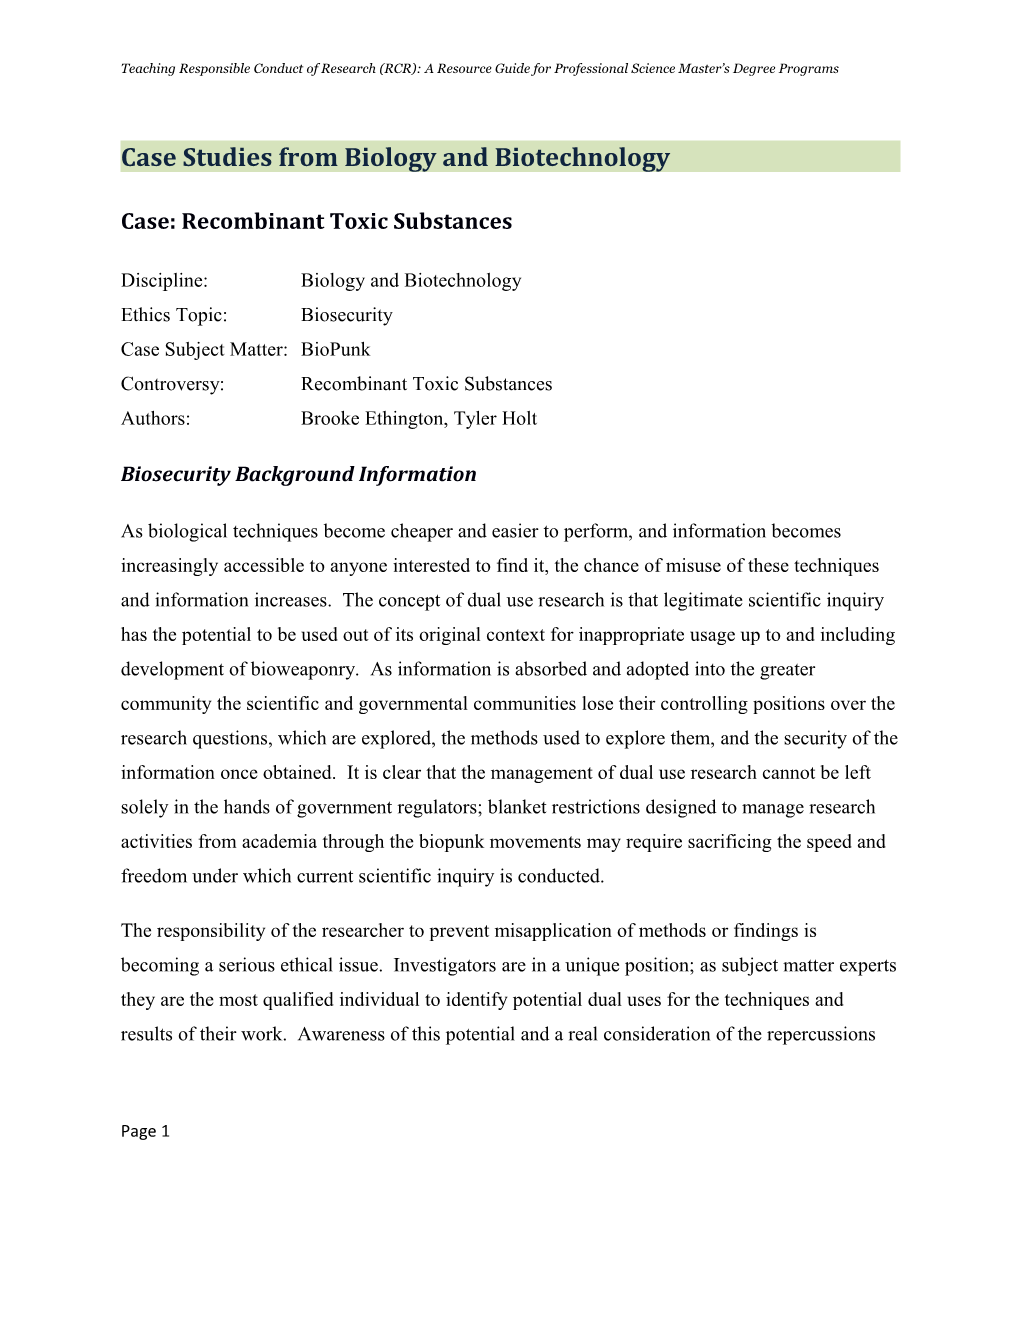 Case Studies from Biology and Biotechnology